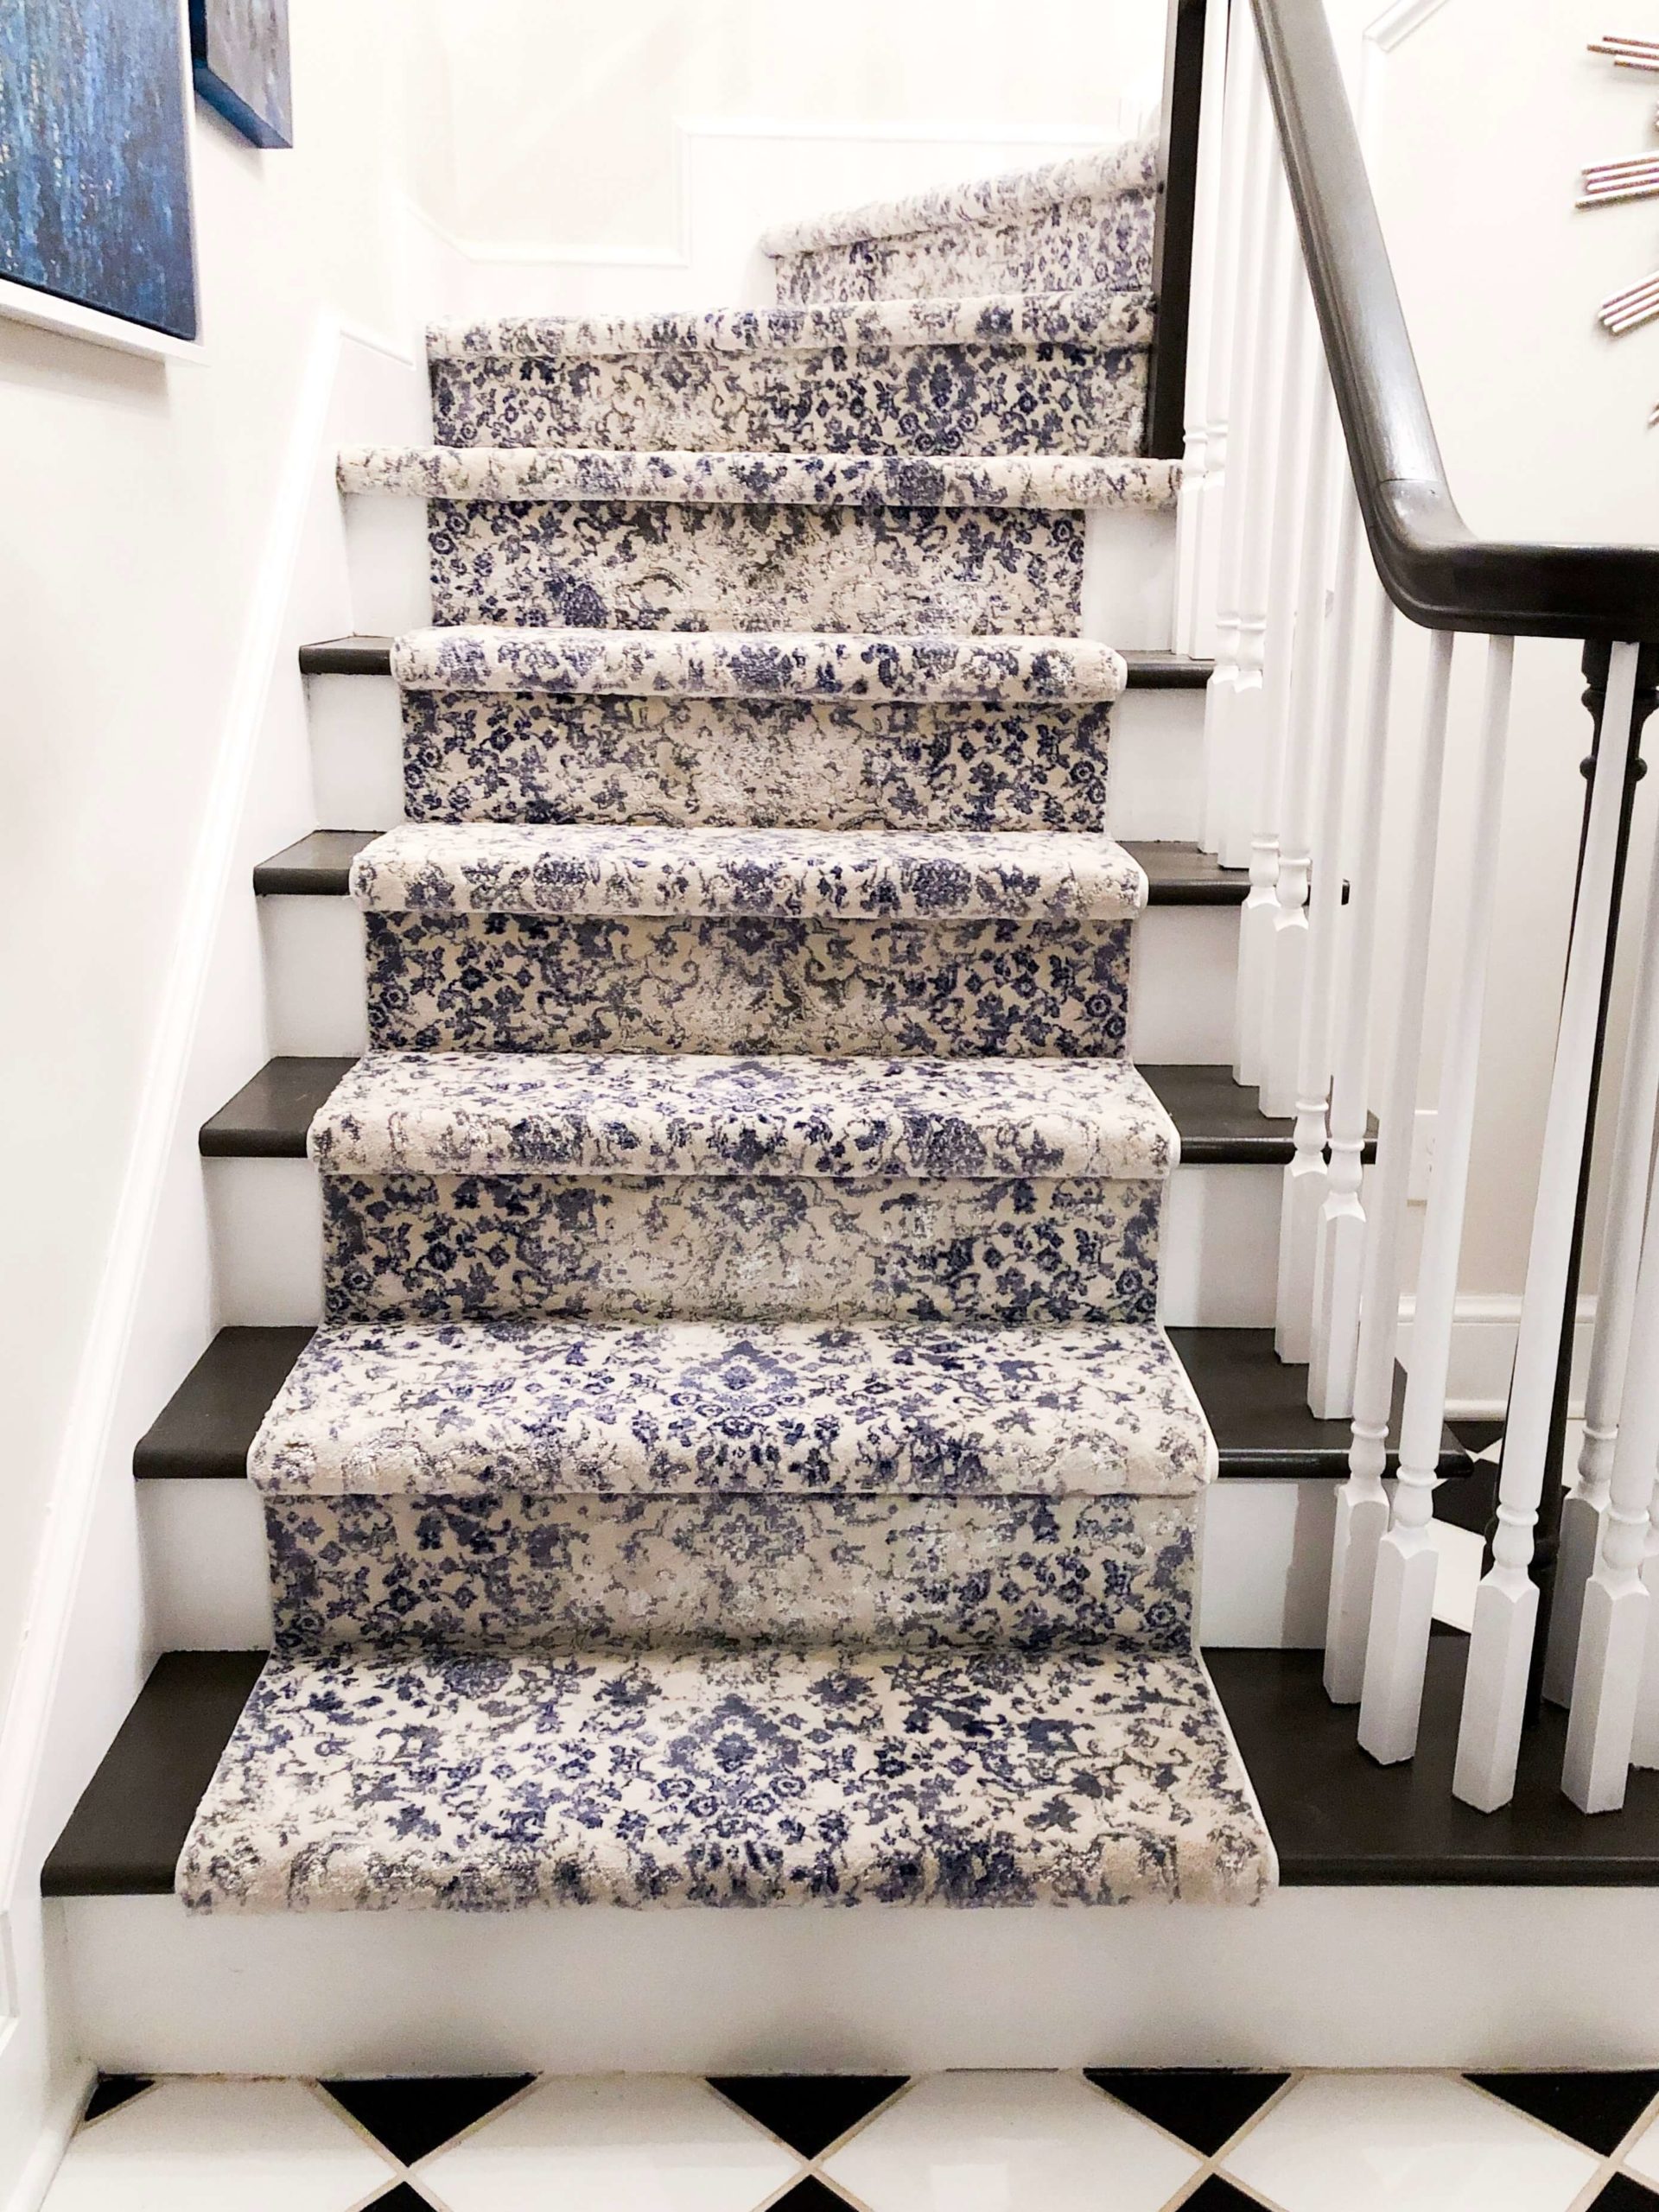 Blue and White patterened carpeting on Stairway Transformation Eclectic Interiors